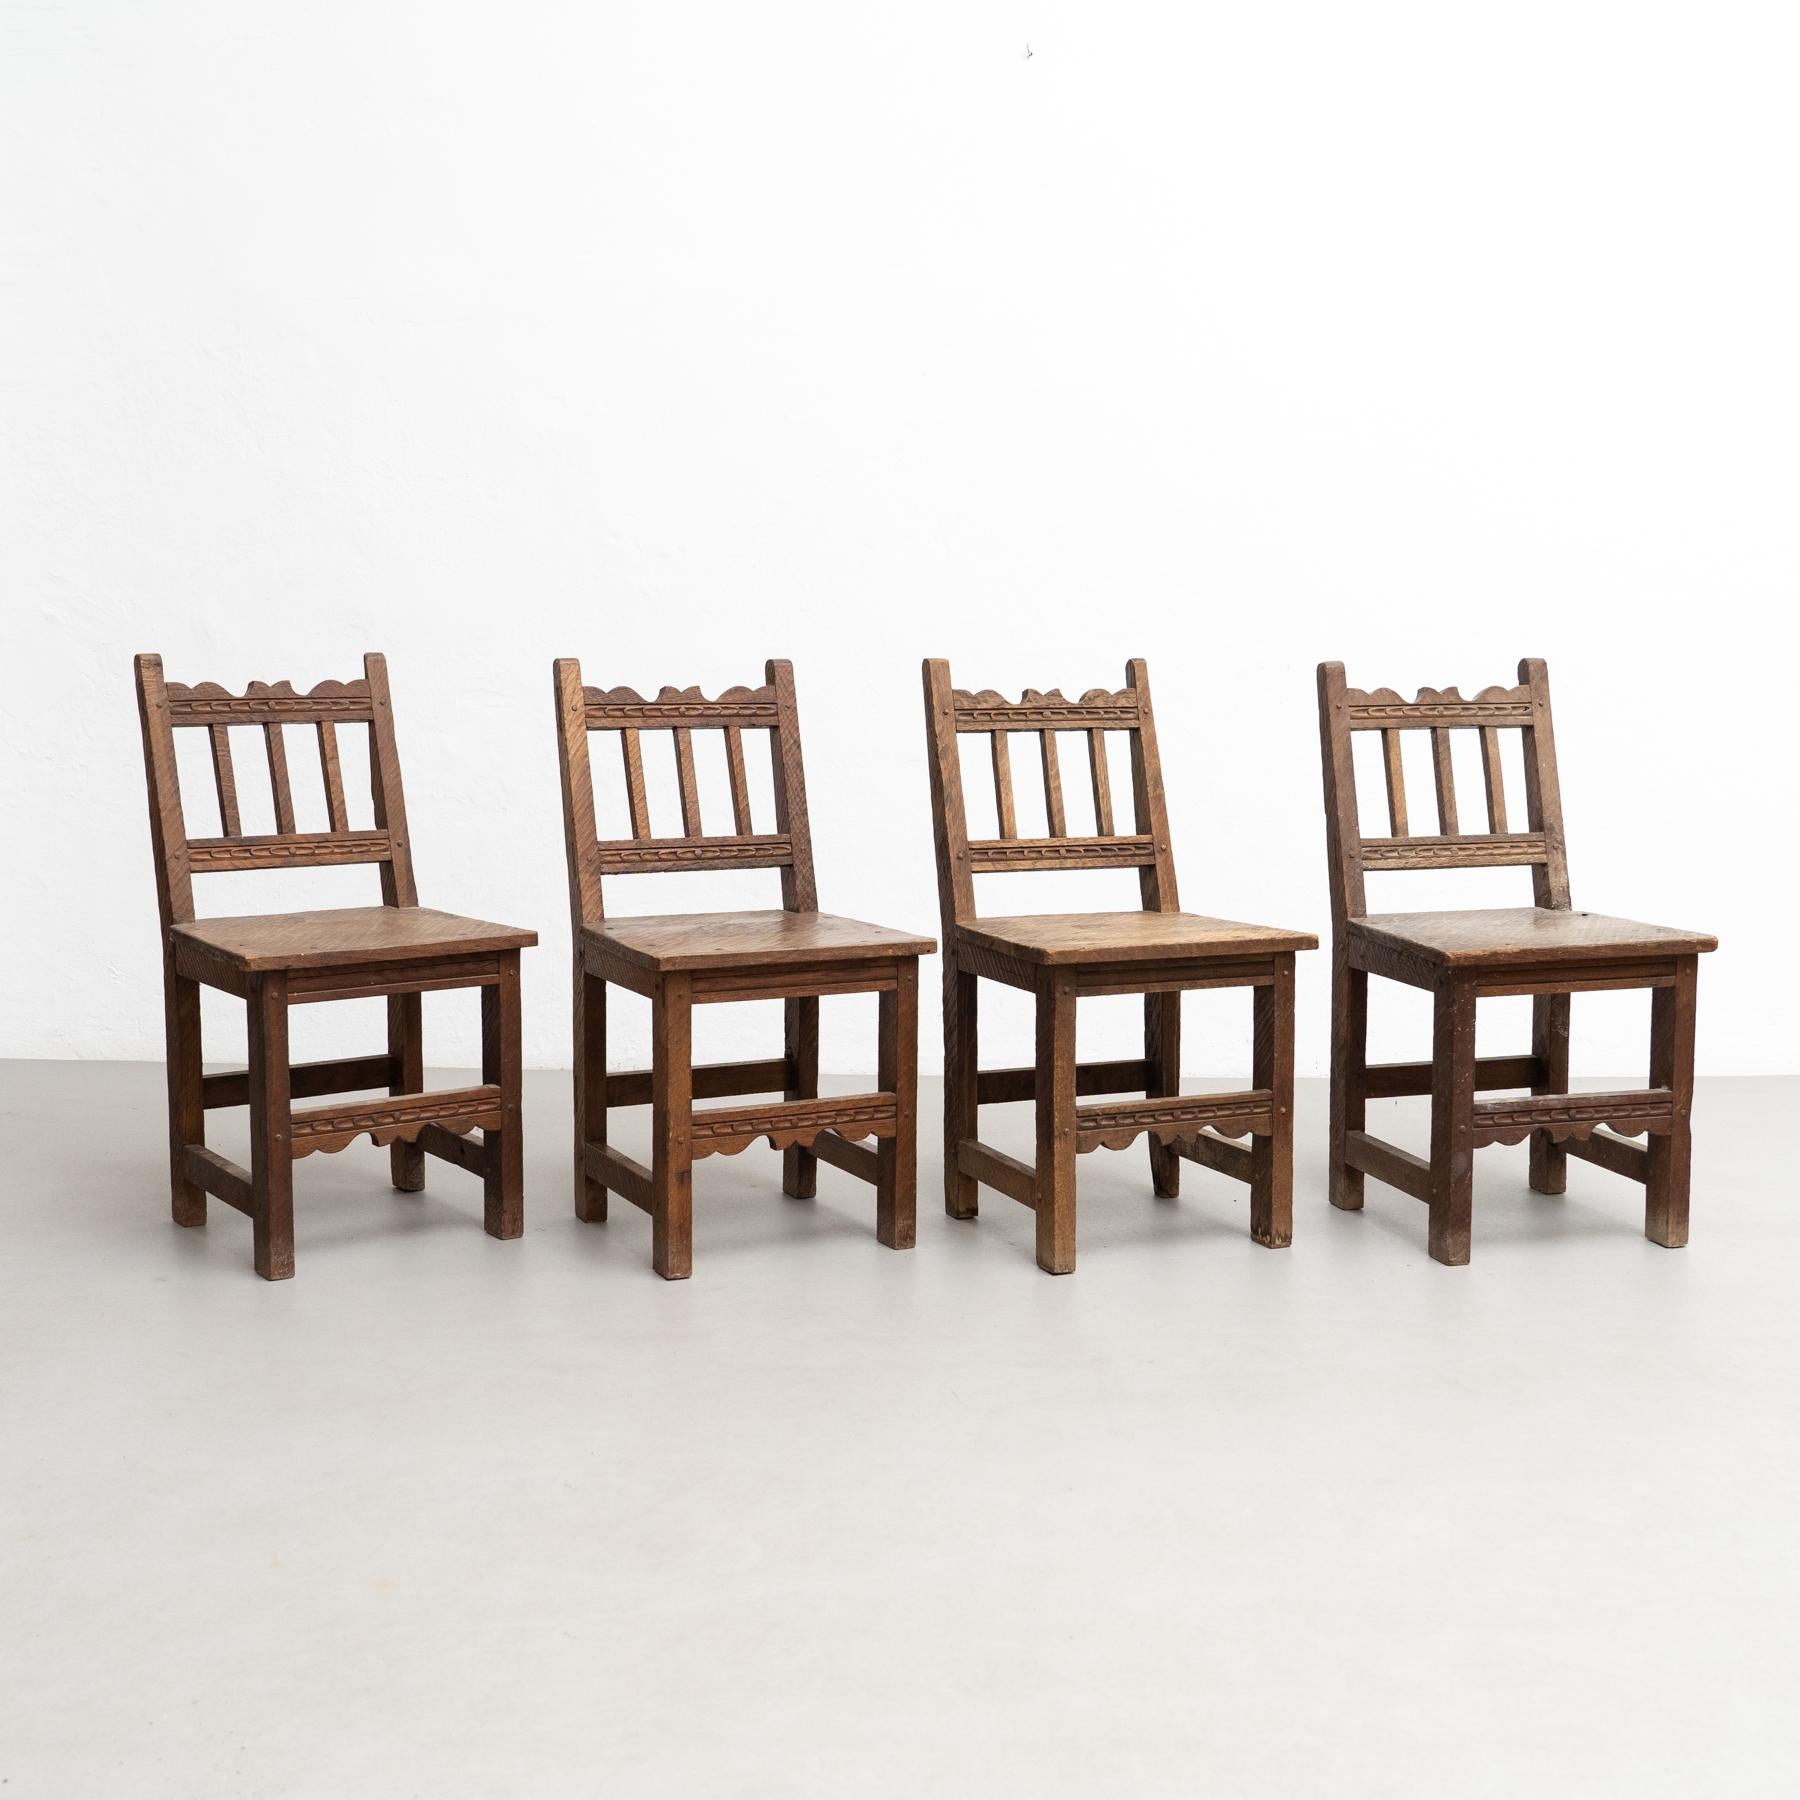 Set of four rustic wood French chairs.

Embrace the rustic charm of this set of four mid-century modern rationalist wood chairs, manufactured in France circa 1940. These chairs showcase a timeless design, making them a perfect addition to any home